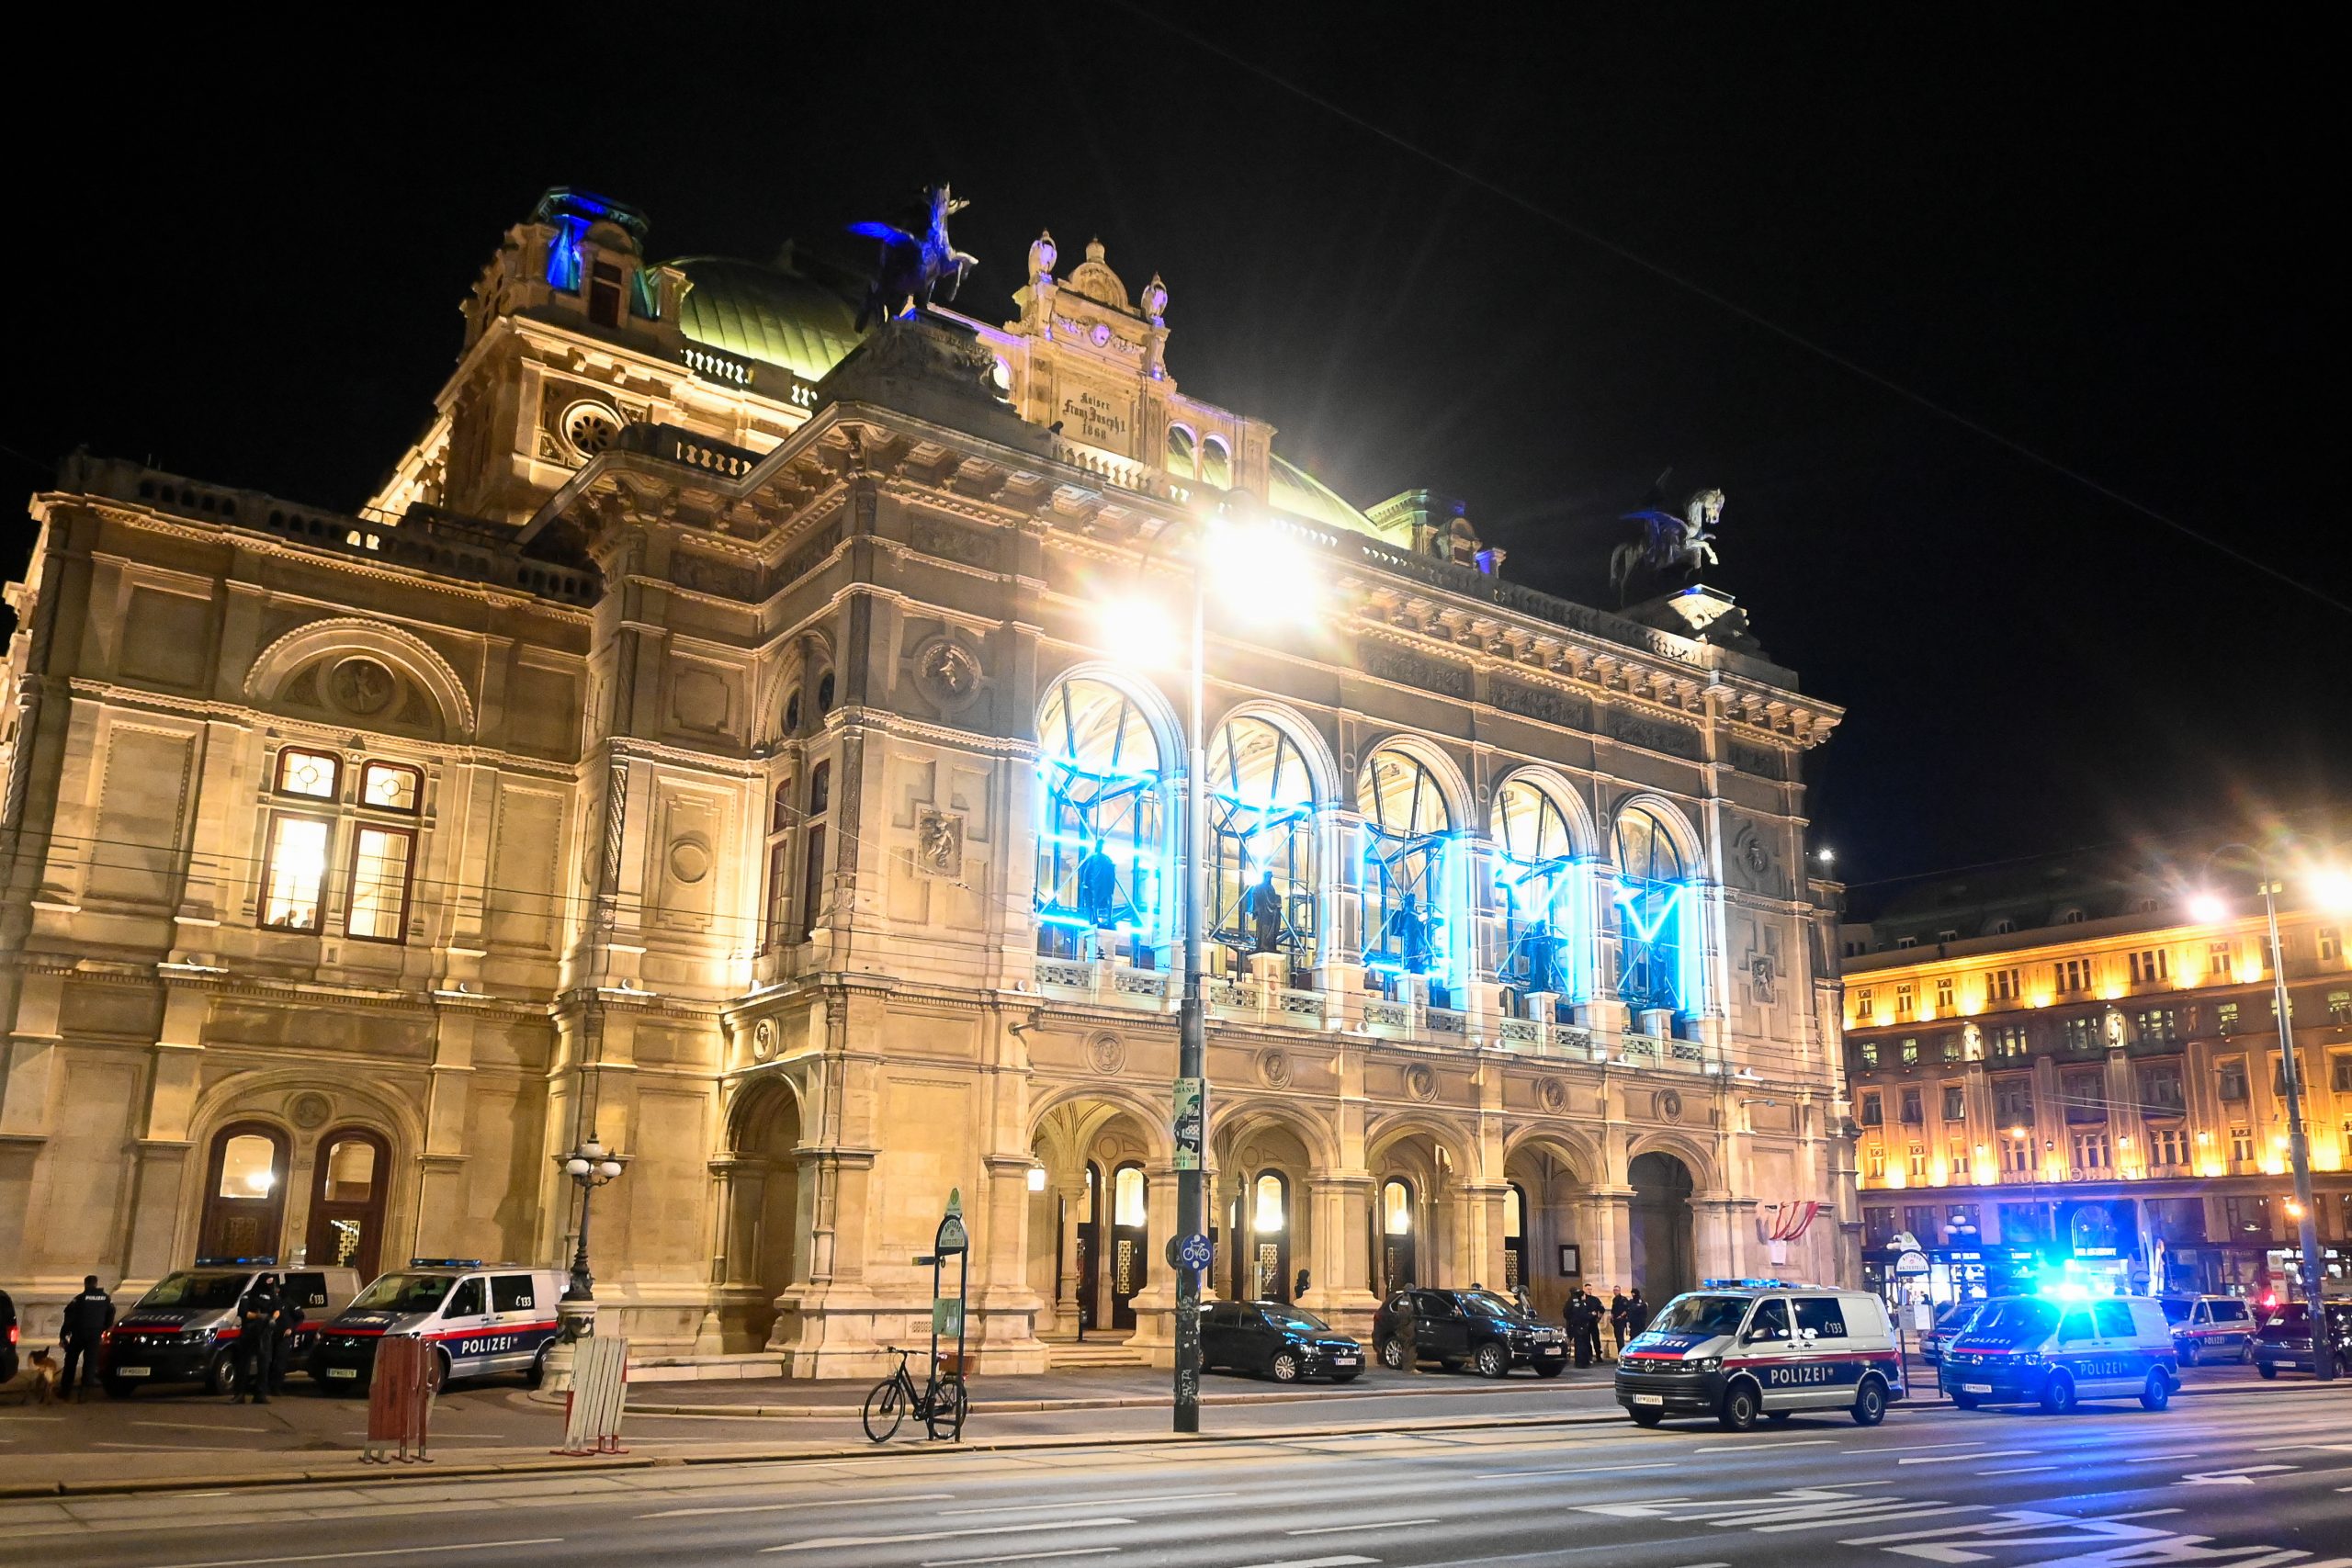 epa08794166 Austrian police men guard The Wiener Staatsoper (Vienna State Opera) after a shooting near the 'Stadttempel' synagogue in Vienna, Austria, 02 November 2020. According to recent reports, at least one person is reported to have died and three are injured in what officials treat as a terror attack.  EPA/CHRISTIAN BRUNA